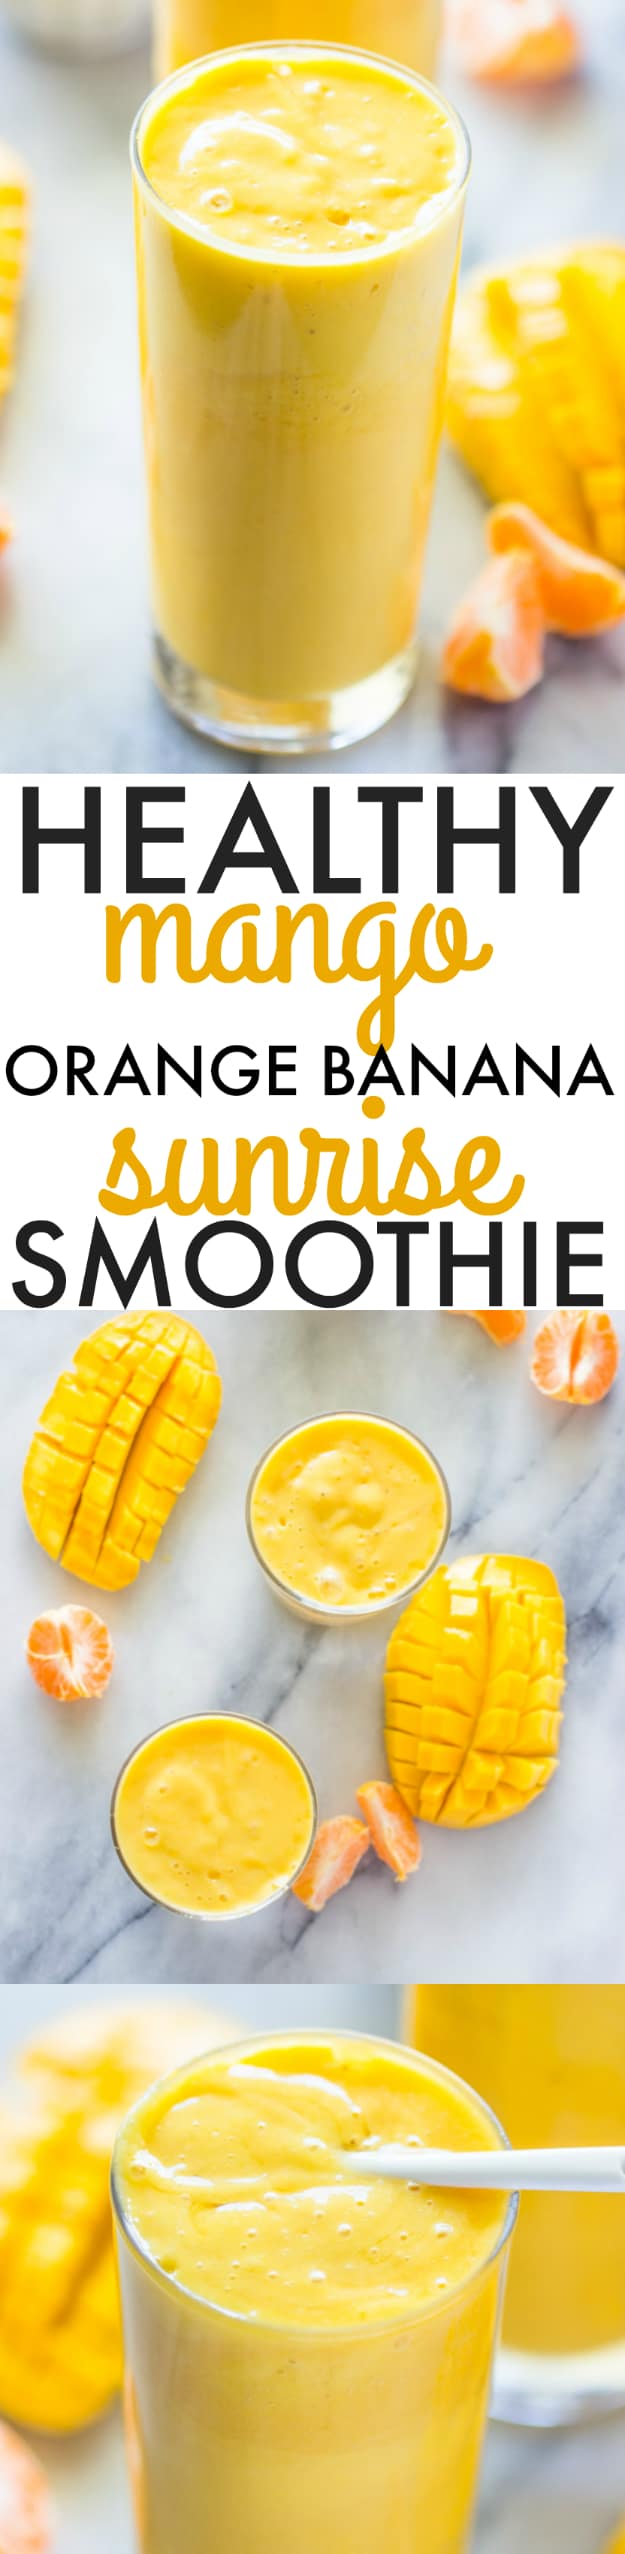 Healthy Smoothie Recipes - Healthy Mango Orange Banana Sunrise Smoothie - Easy ideas perfect for breakfast, energy. Low calorie and high protein recipes for weightloss and to lose weight. Simple homemade recipe ideas that kids love. Quick EASY morning recipes before work and school, after workout #smoothies #healthy #smoothie #healthyrecipes #recipes